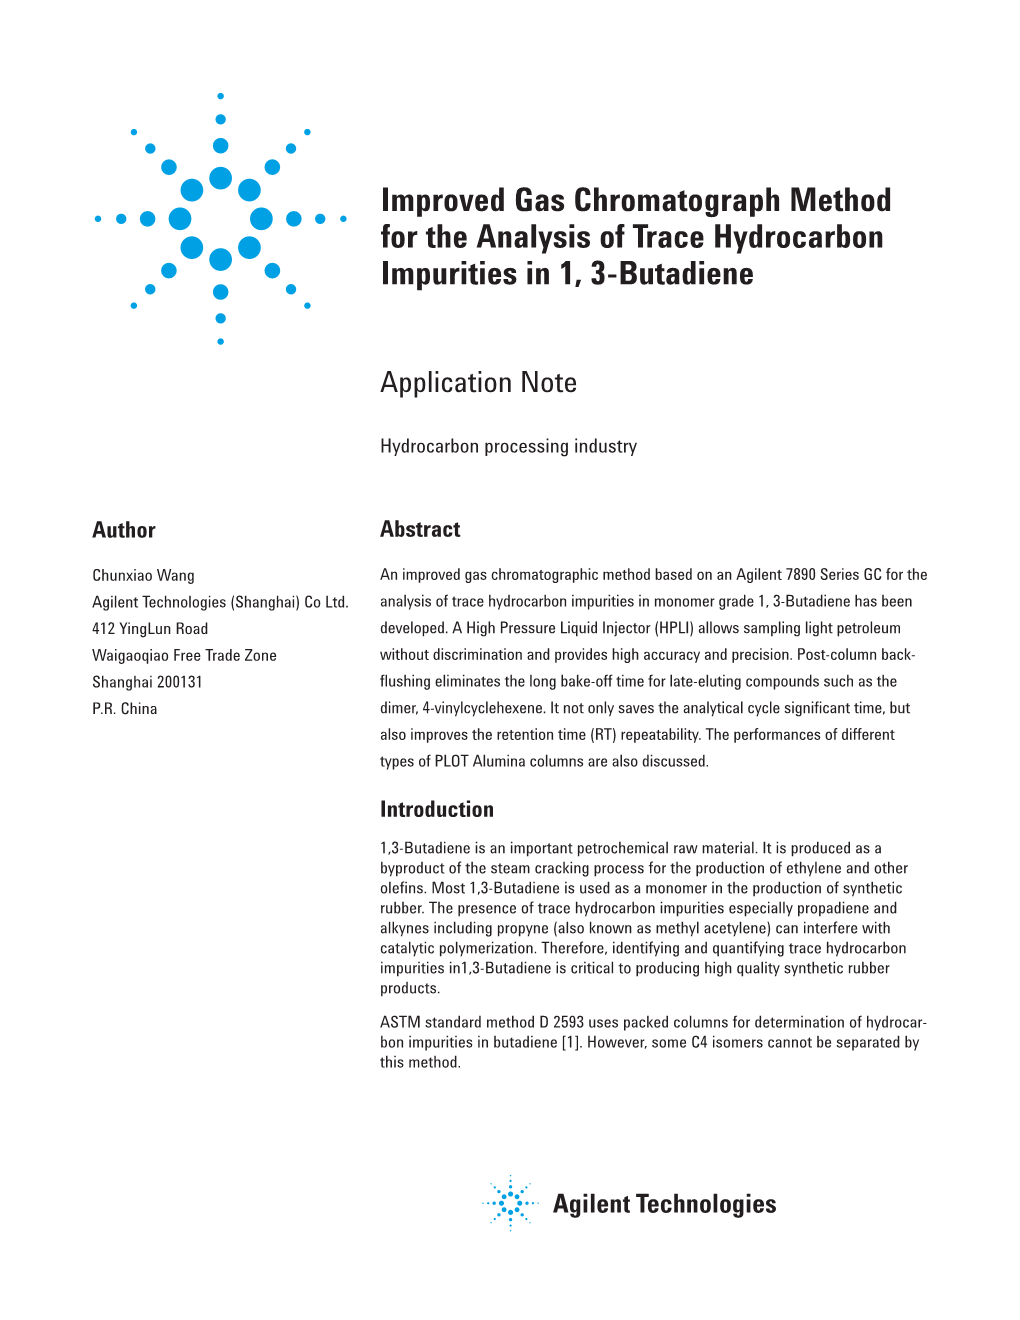 Improved Gas Chromatograph Method for the Analysis of Trace Hydrocarbon Impurities in 1, 3-Butadiene